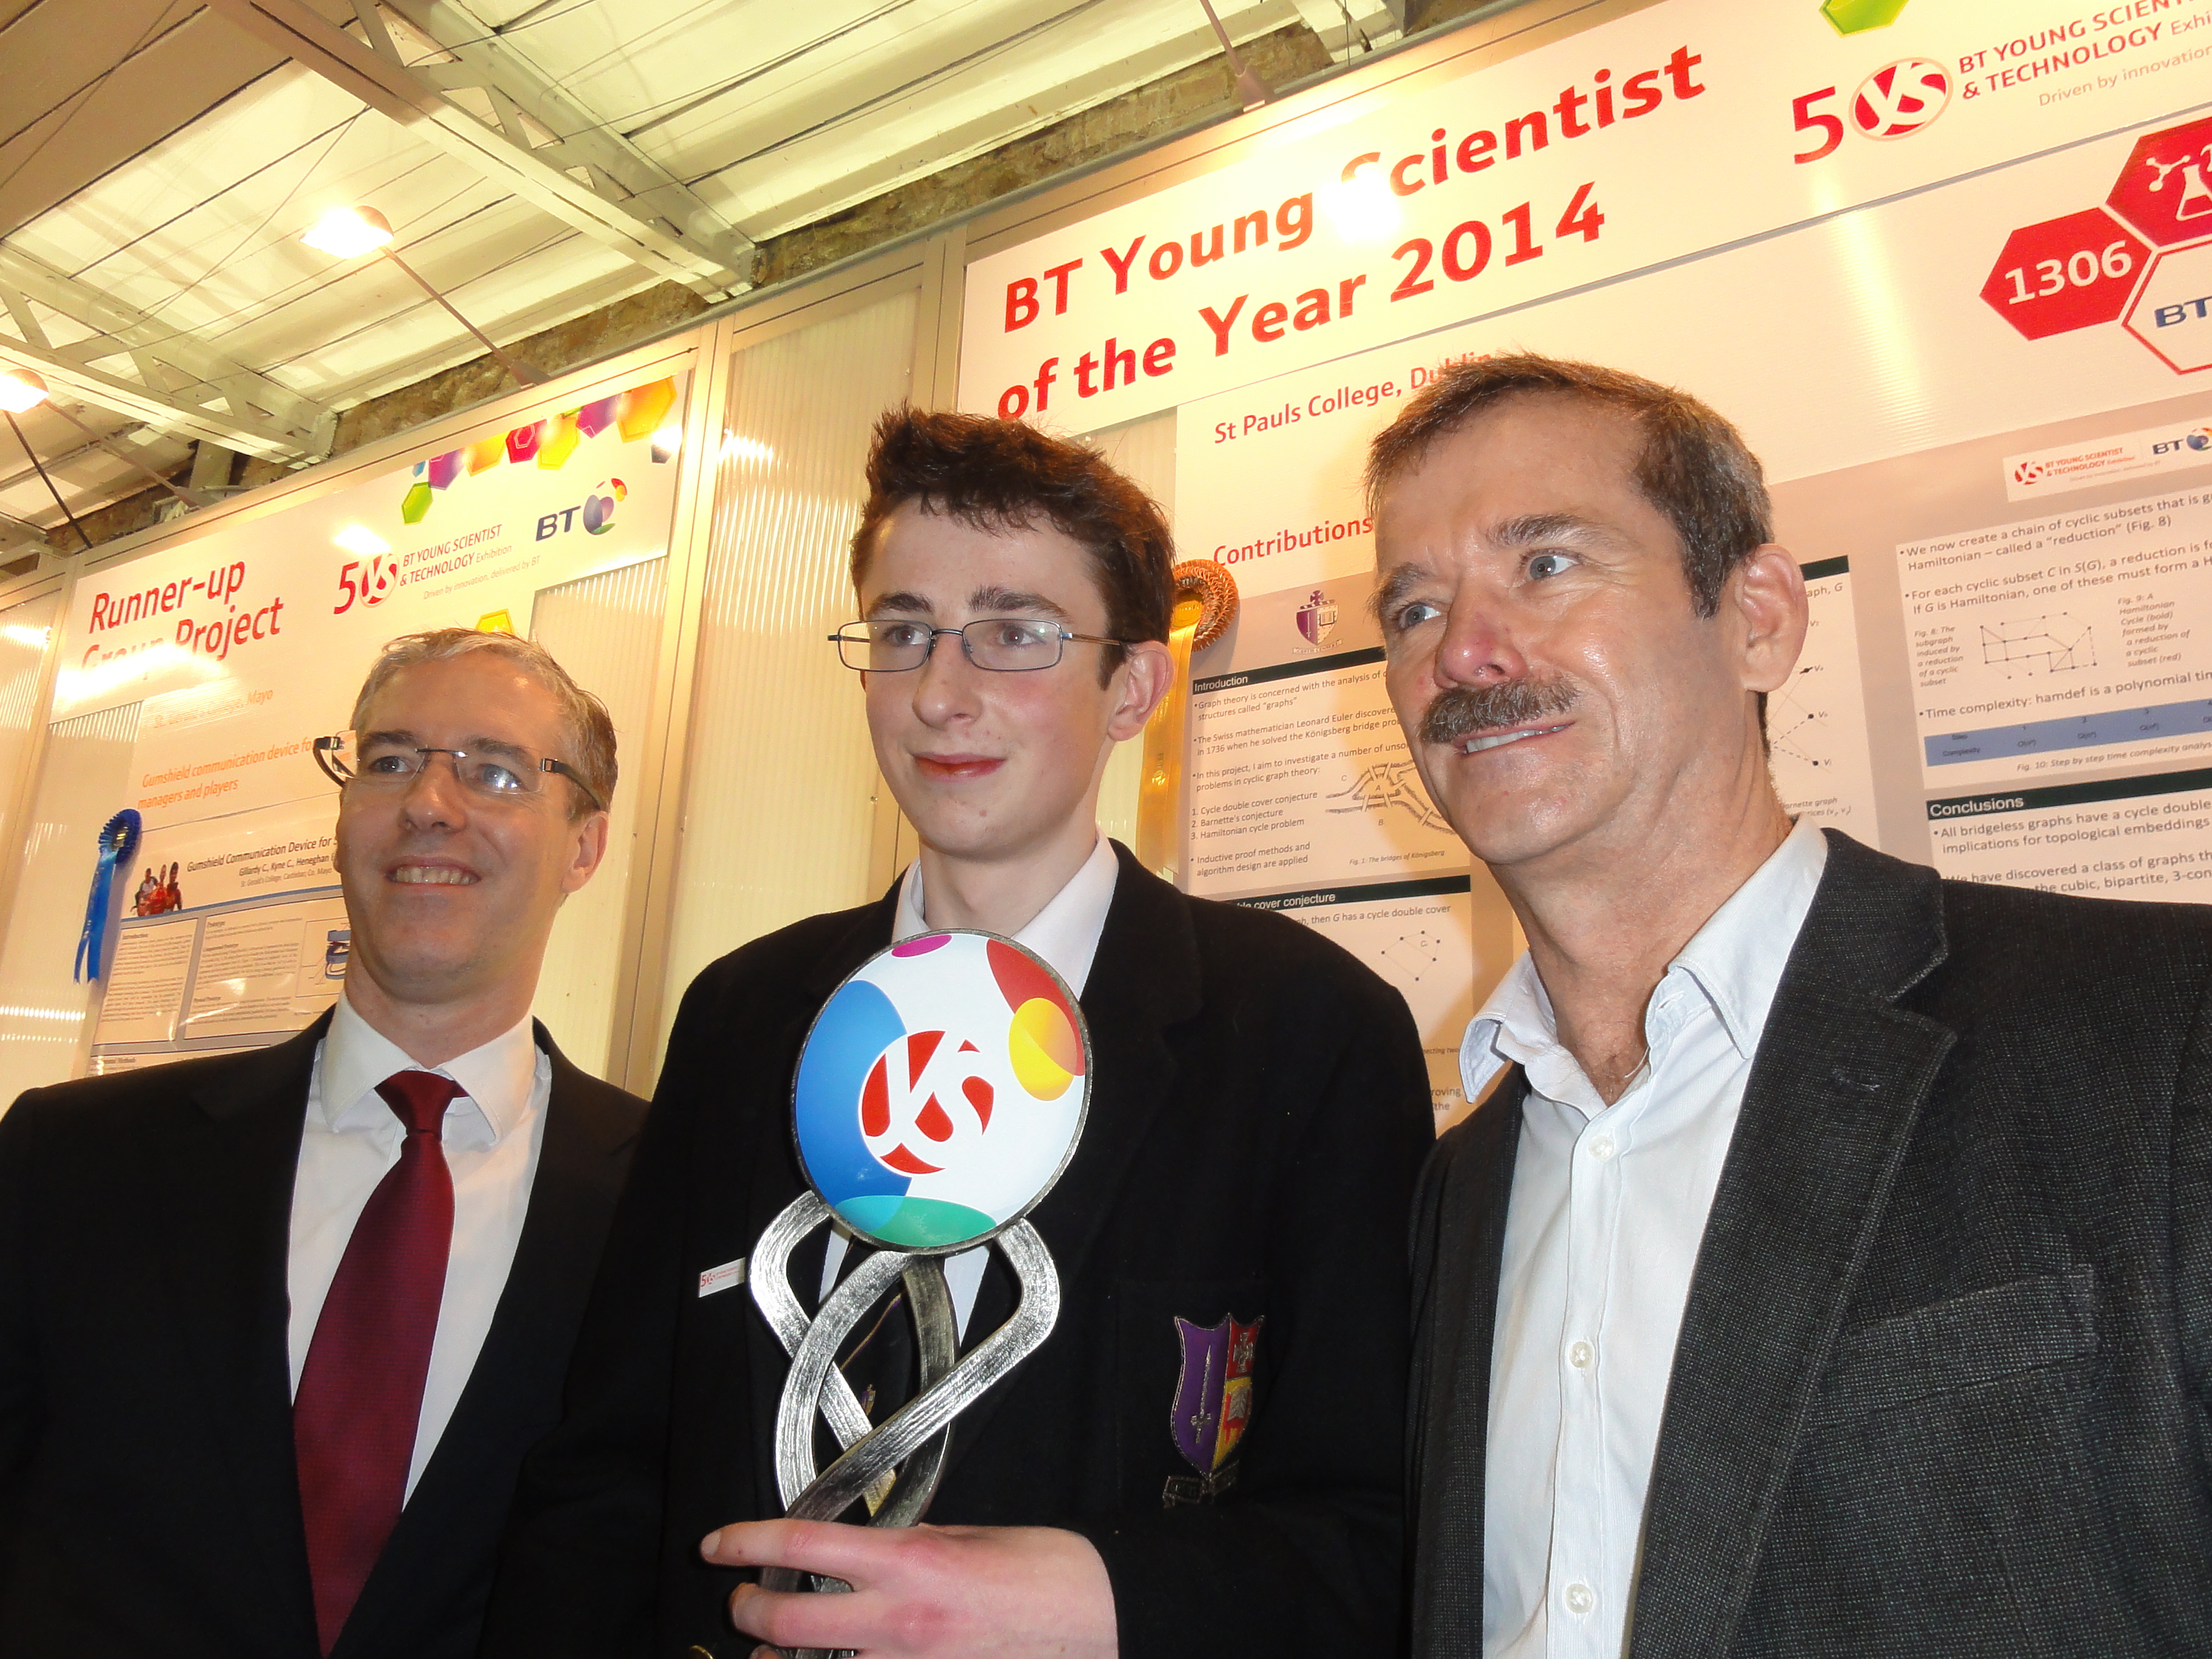 Raheny Student wins EU Contest for Young Scientists